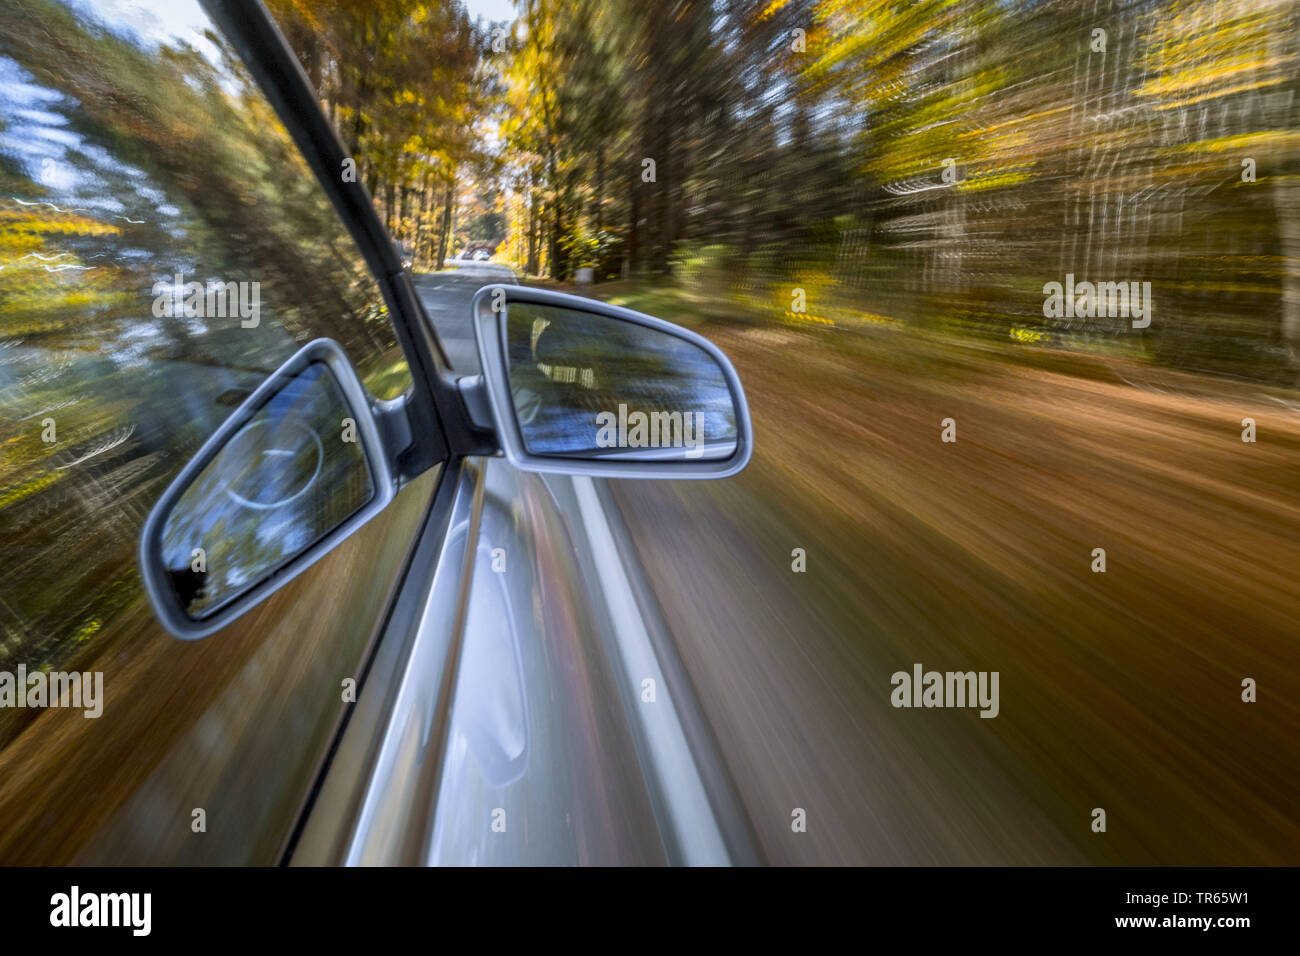 Car driving on a street in autumn, Germany, Bavaria Stock Photo